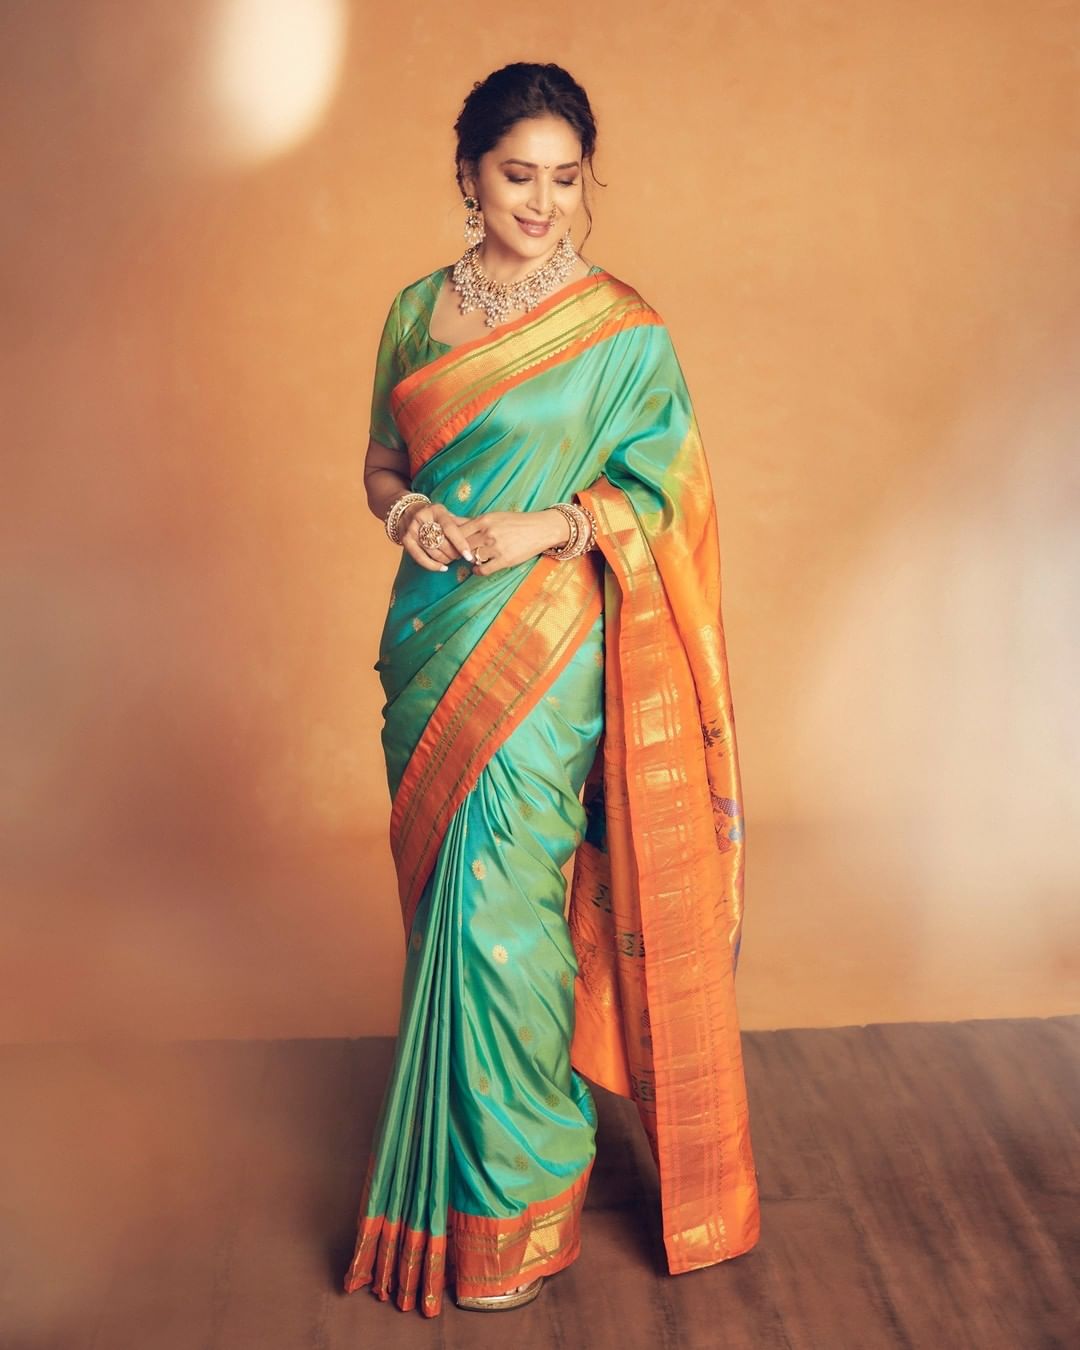 Madhuri Dixit looks gorgeous in the traditional silk saree. 